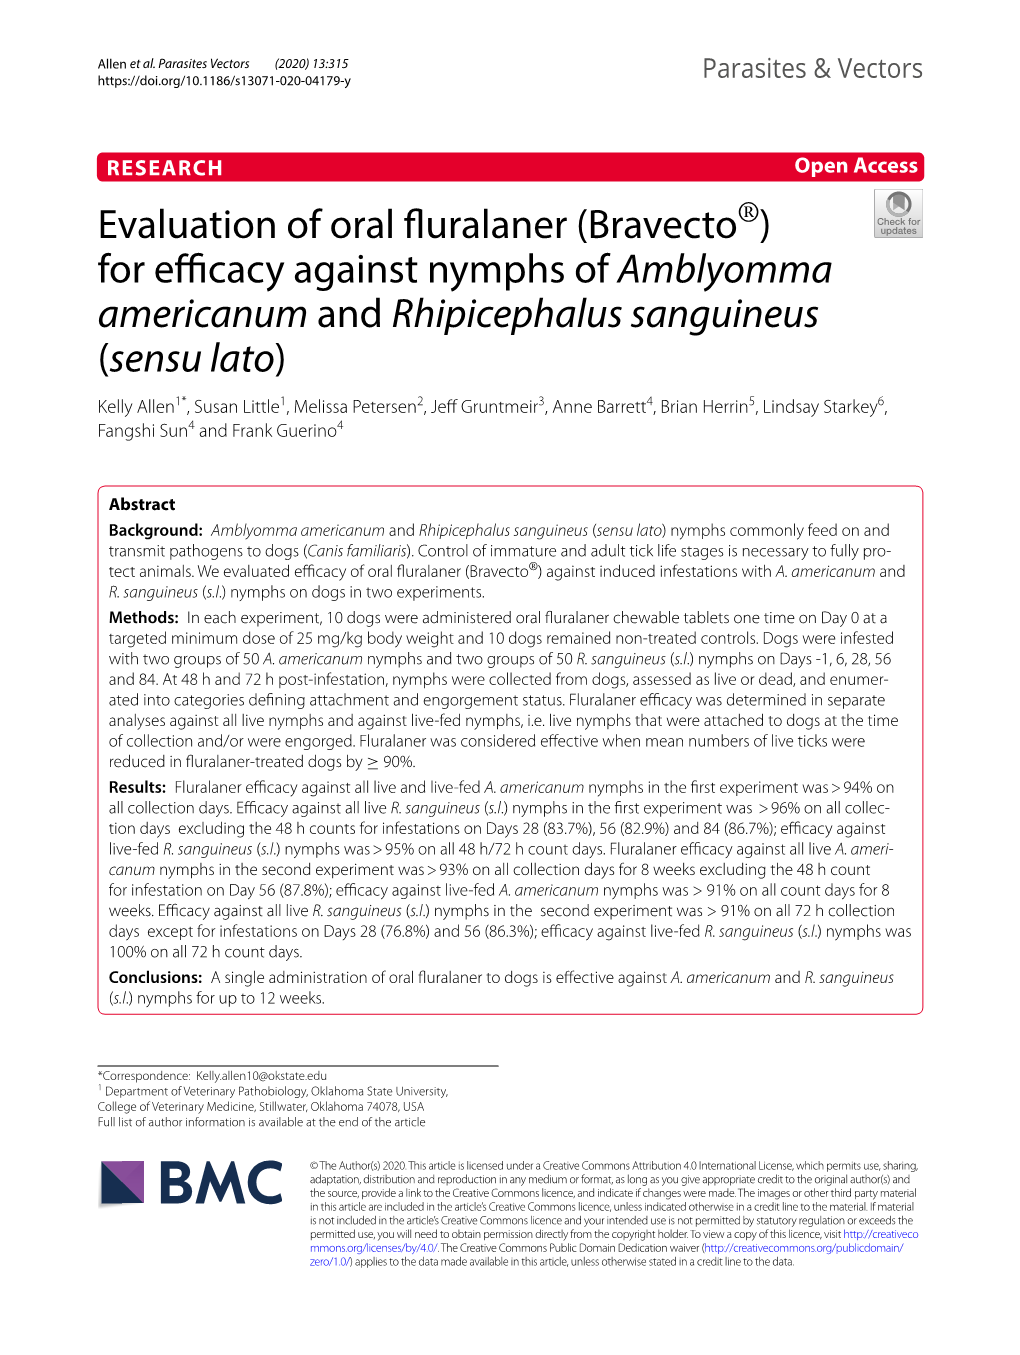 Evaluation of Oral Fluralaner (Bravecto®) for Efficacy Against Nymphs Of